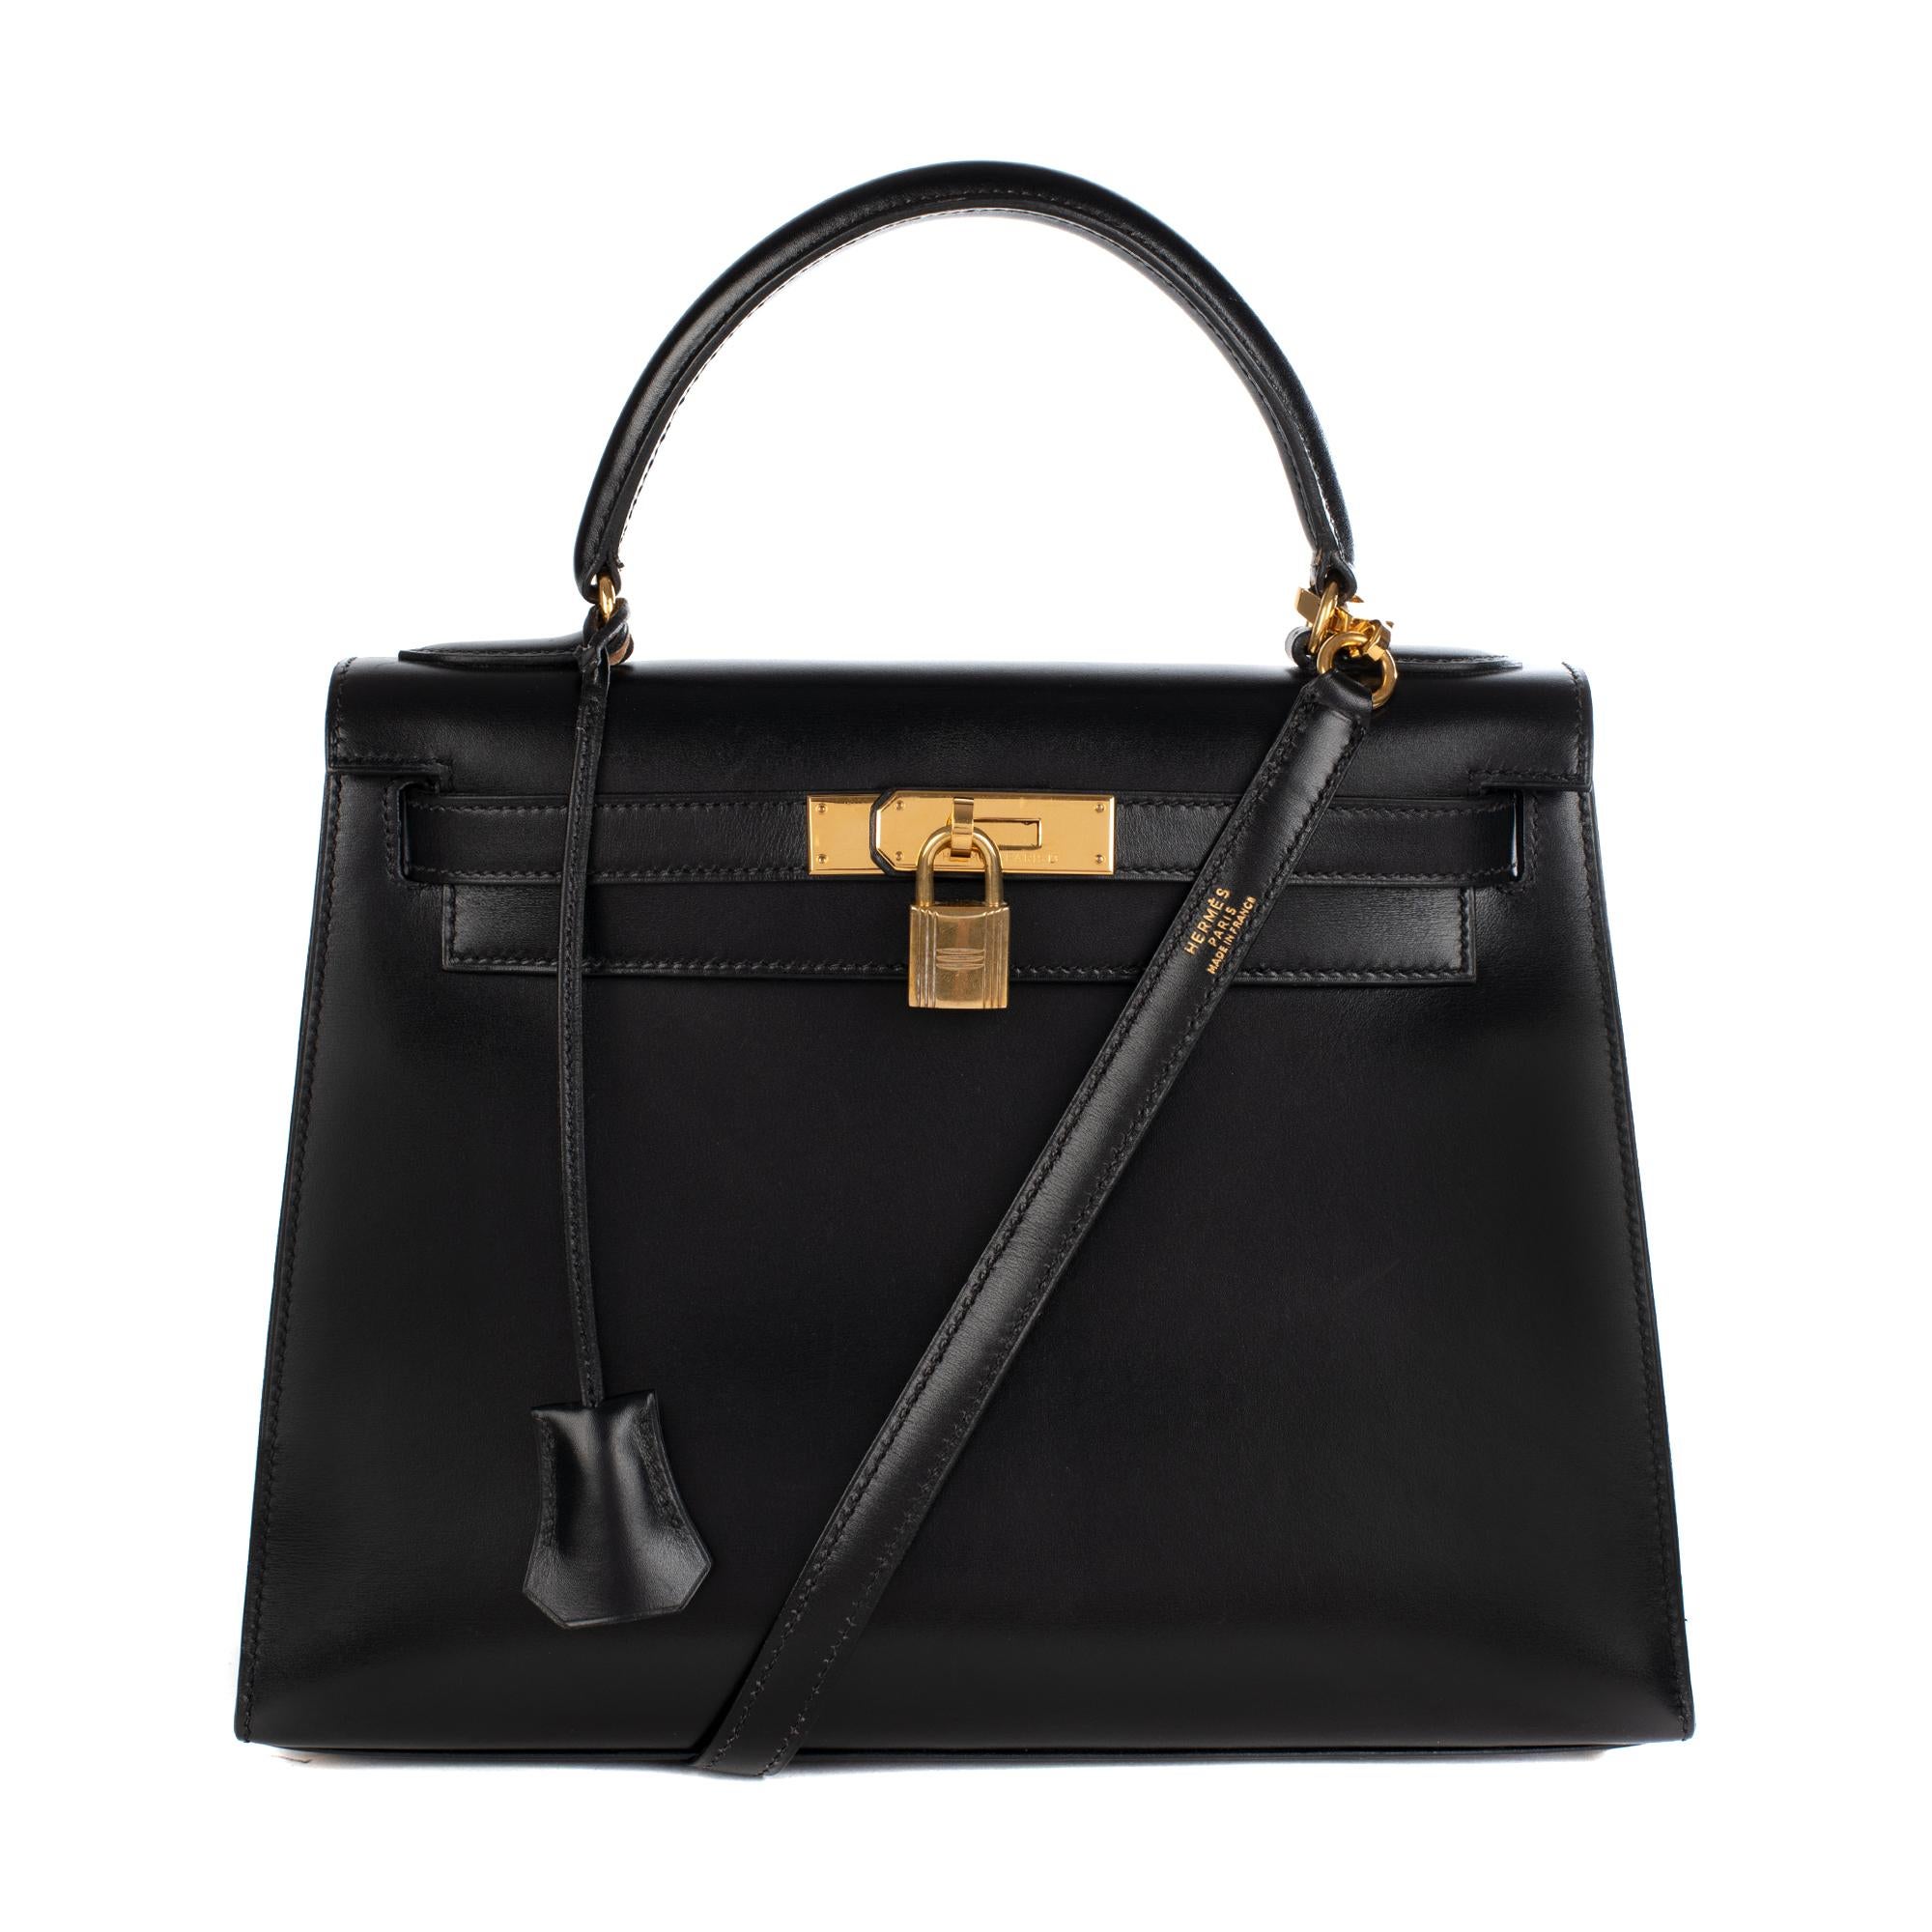 The Iconic Hermes Kelly Handbag 28cm sellier in black calf box leather , gold-plated metal trim, black leather box handle, a single removable handle in black leather allowing a handheld or shoulder.

Closure by flap.
Black leather inner lining, one